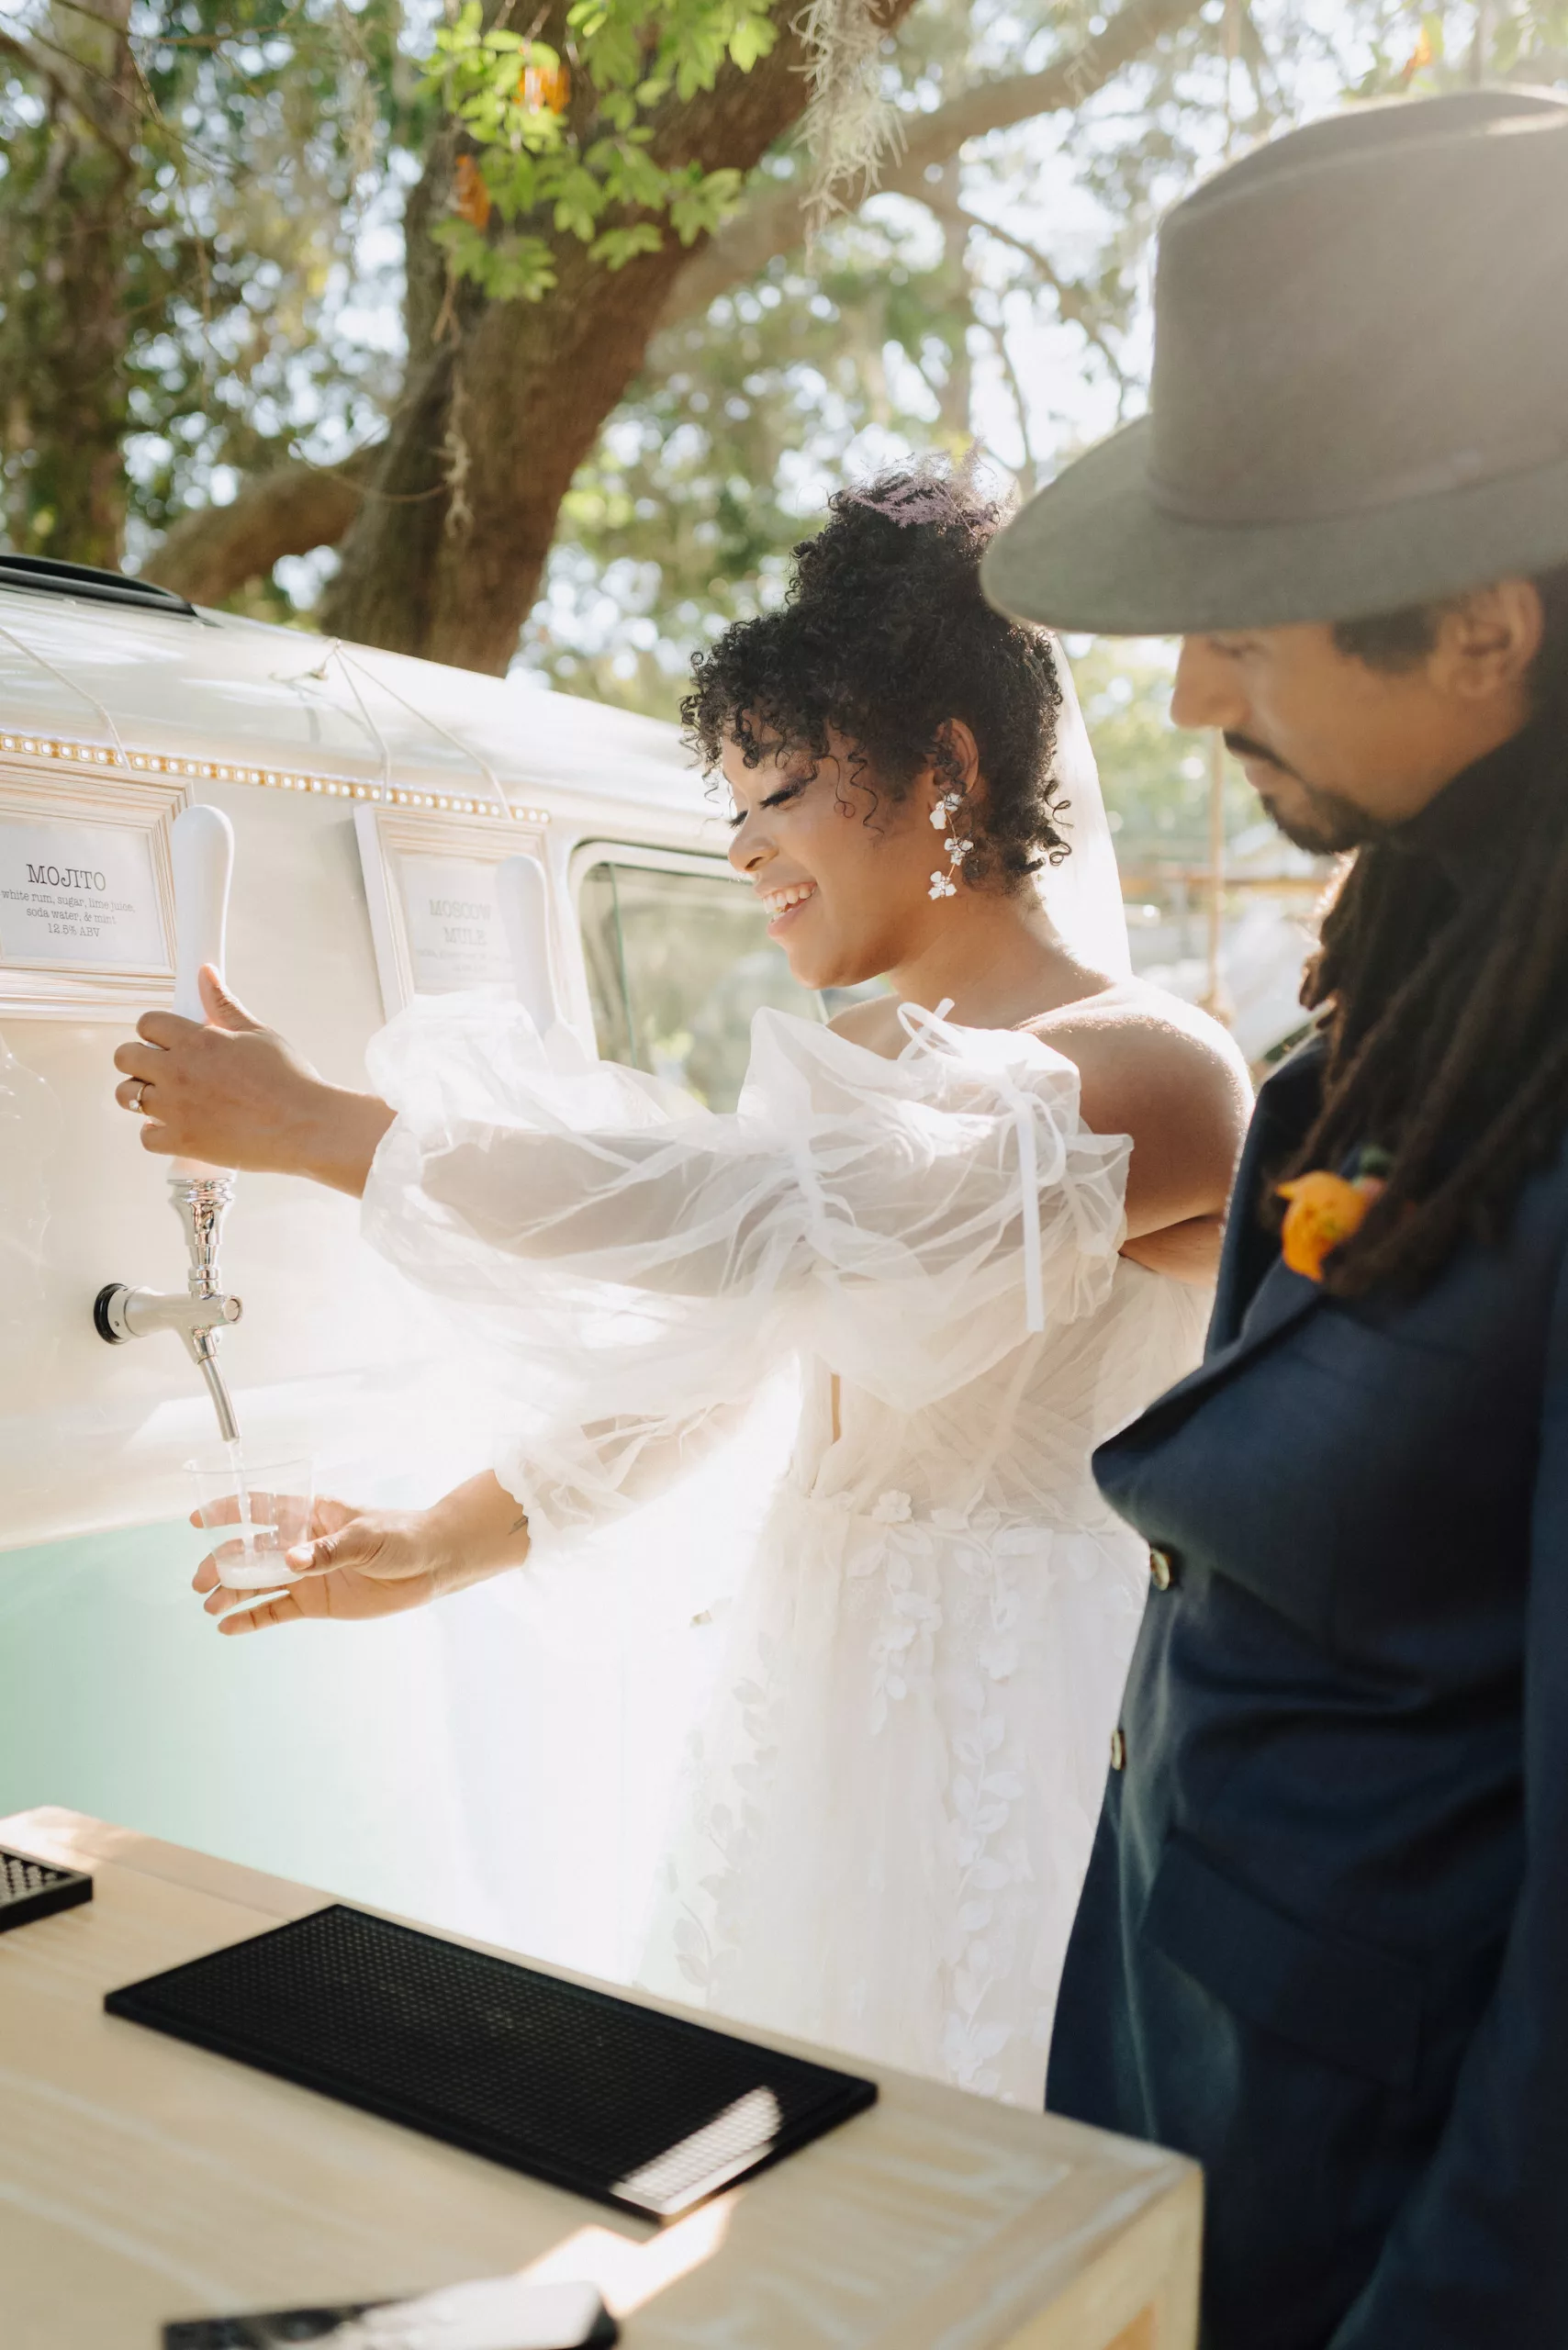 Volkswagen Bus Mobile Bar Inspiration | Whimsical Wedding Reception Cocktail Hour Ideas